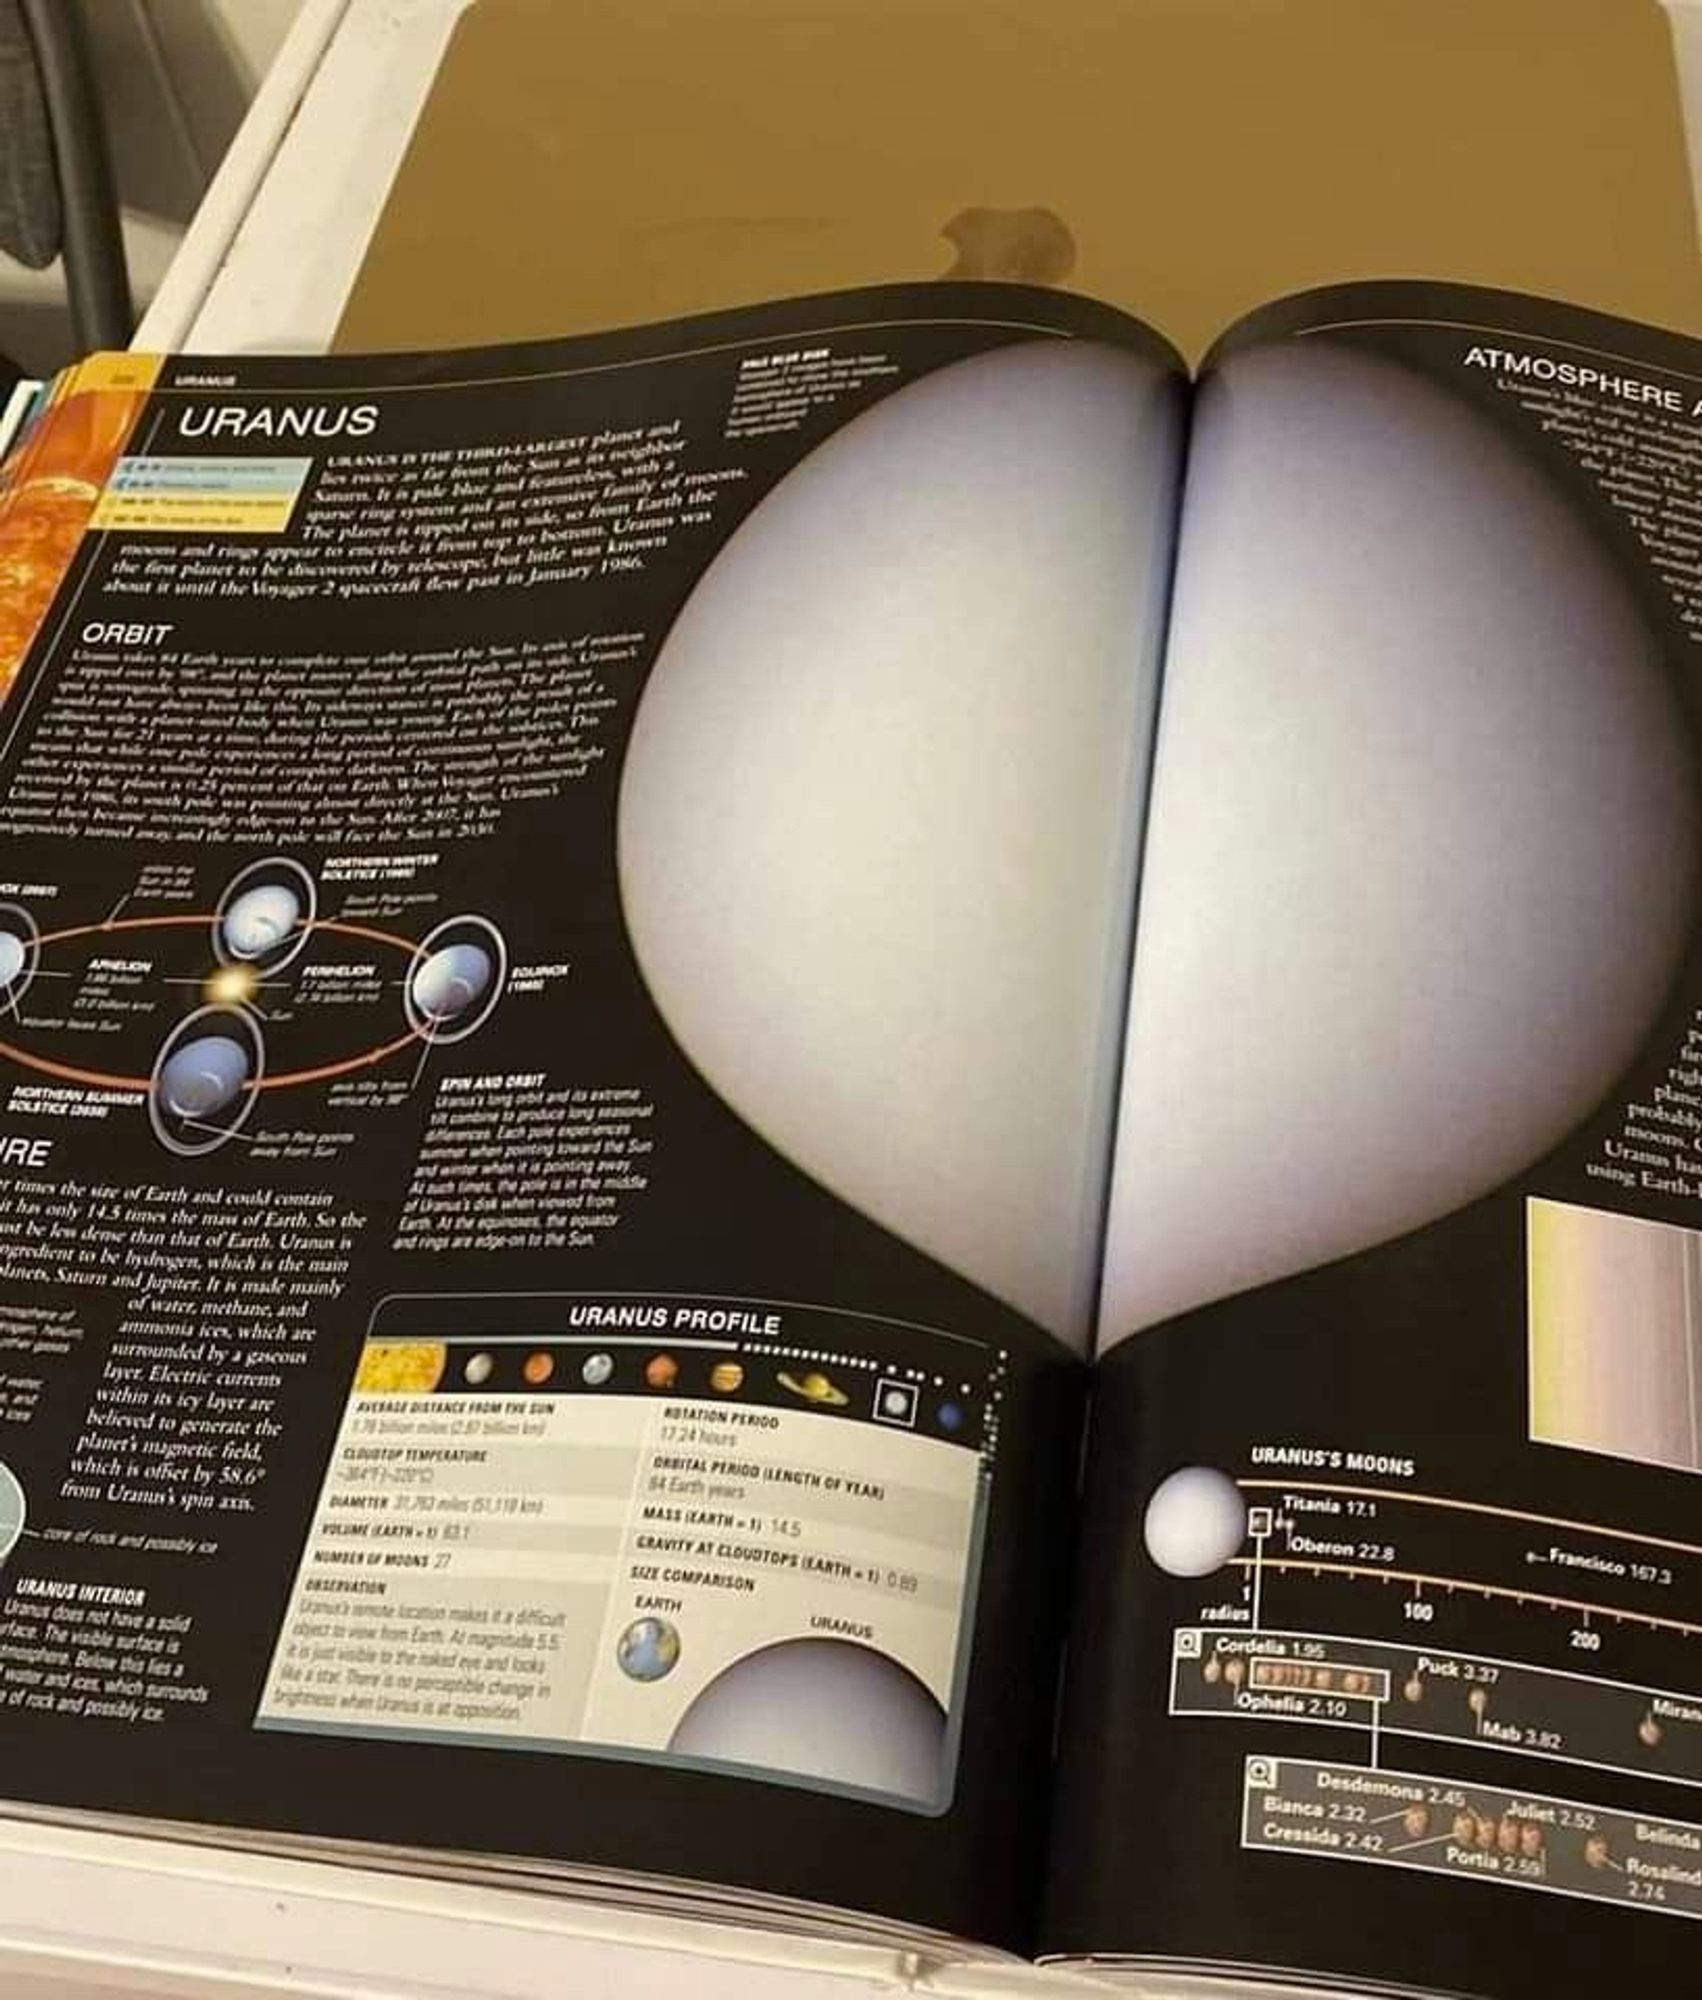 This image is a page from a book about the planet Uranus. It has facts and a picture of the planet. Some of the facts are: Uranus is the seventh planet from the Sun and the third-largest in the solar system. Uranus has an orbital period of about 84 Earth years and rotates on its side. Uranus has a thick atmosphere of mostly hydrogen and helium, with traces of methane that give it a blue-green color. Uranus has 27 known moons and 13 rings. The picture in the book is split down the middle making the planet look like someone's butt.